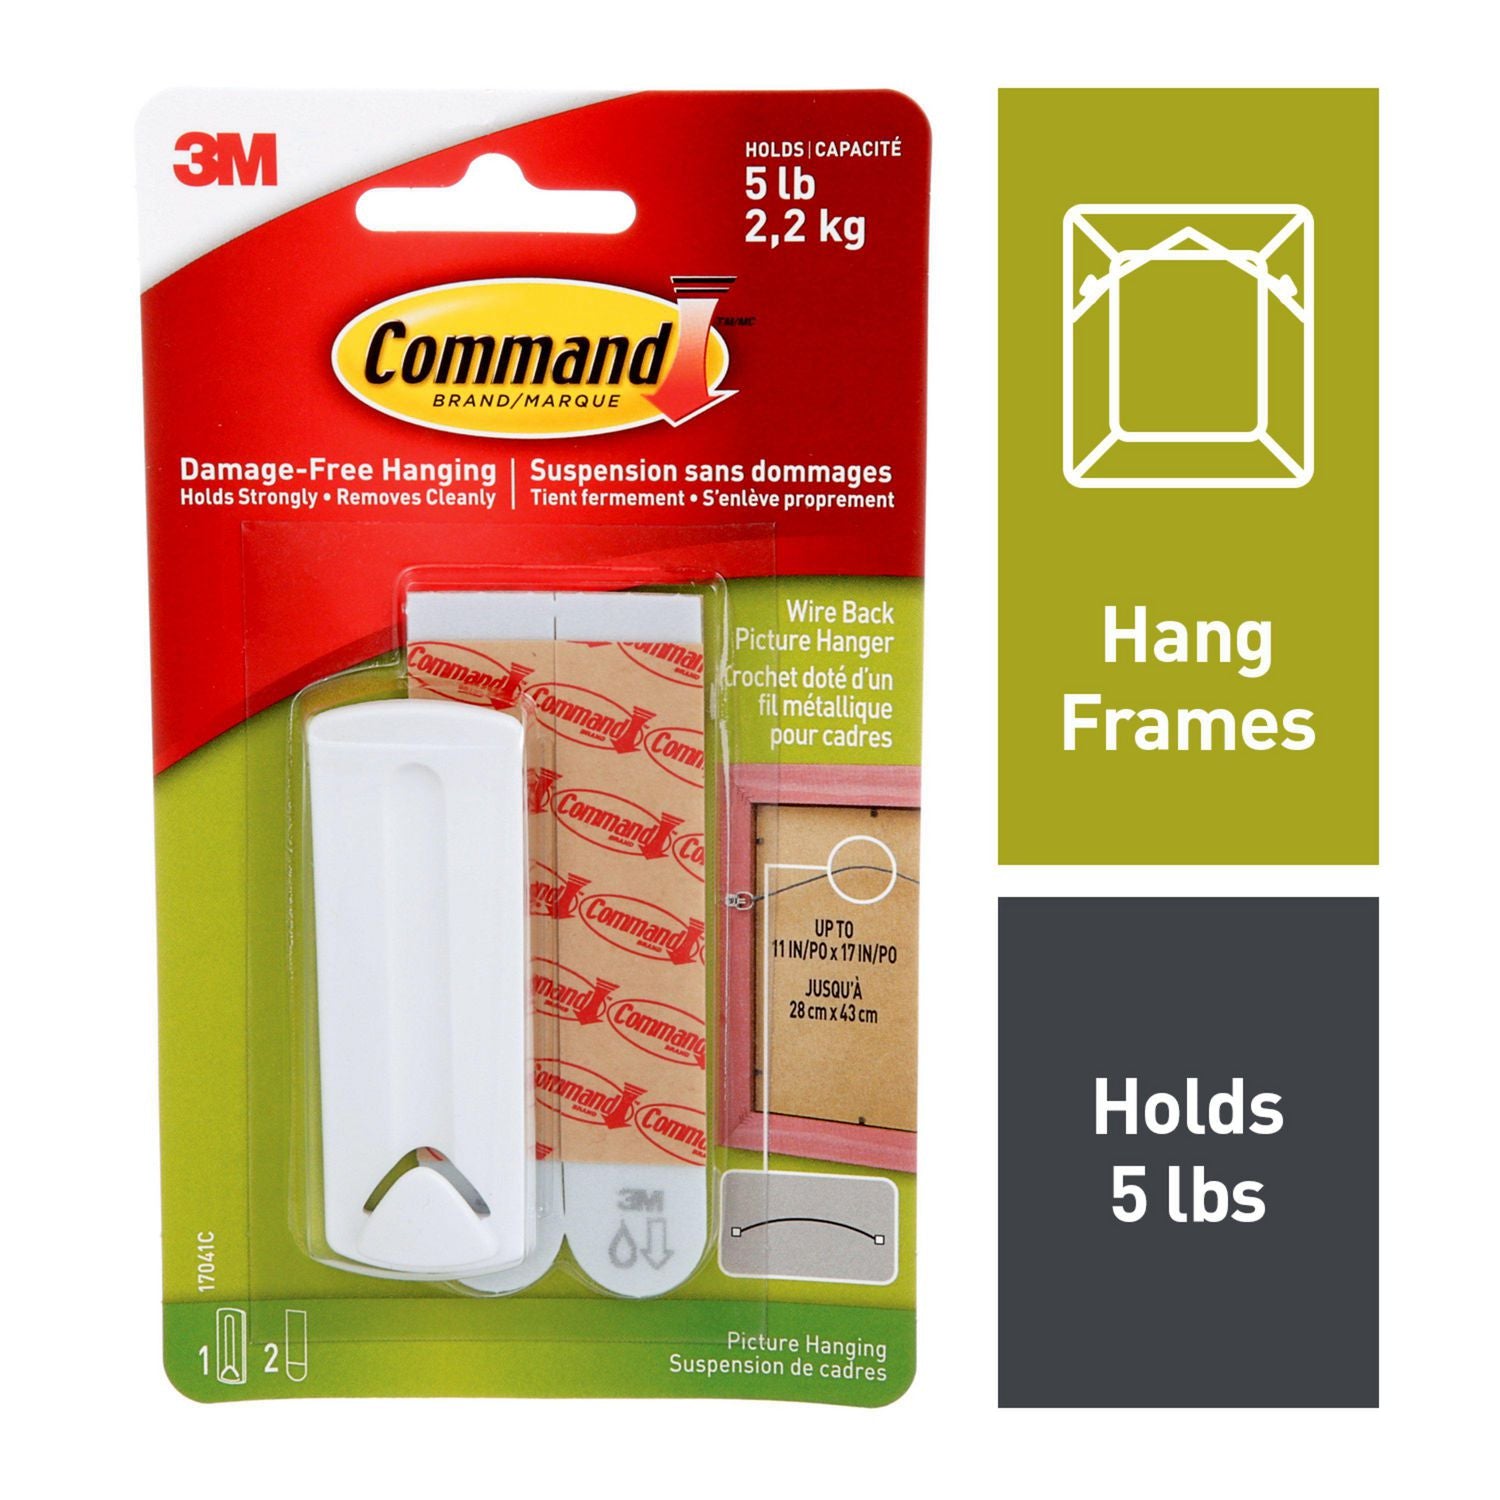 Command™ Large Picture Hanging Strips